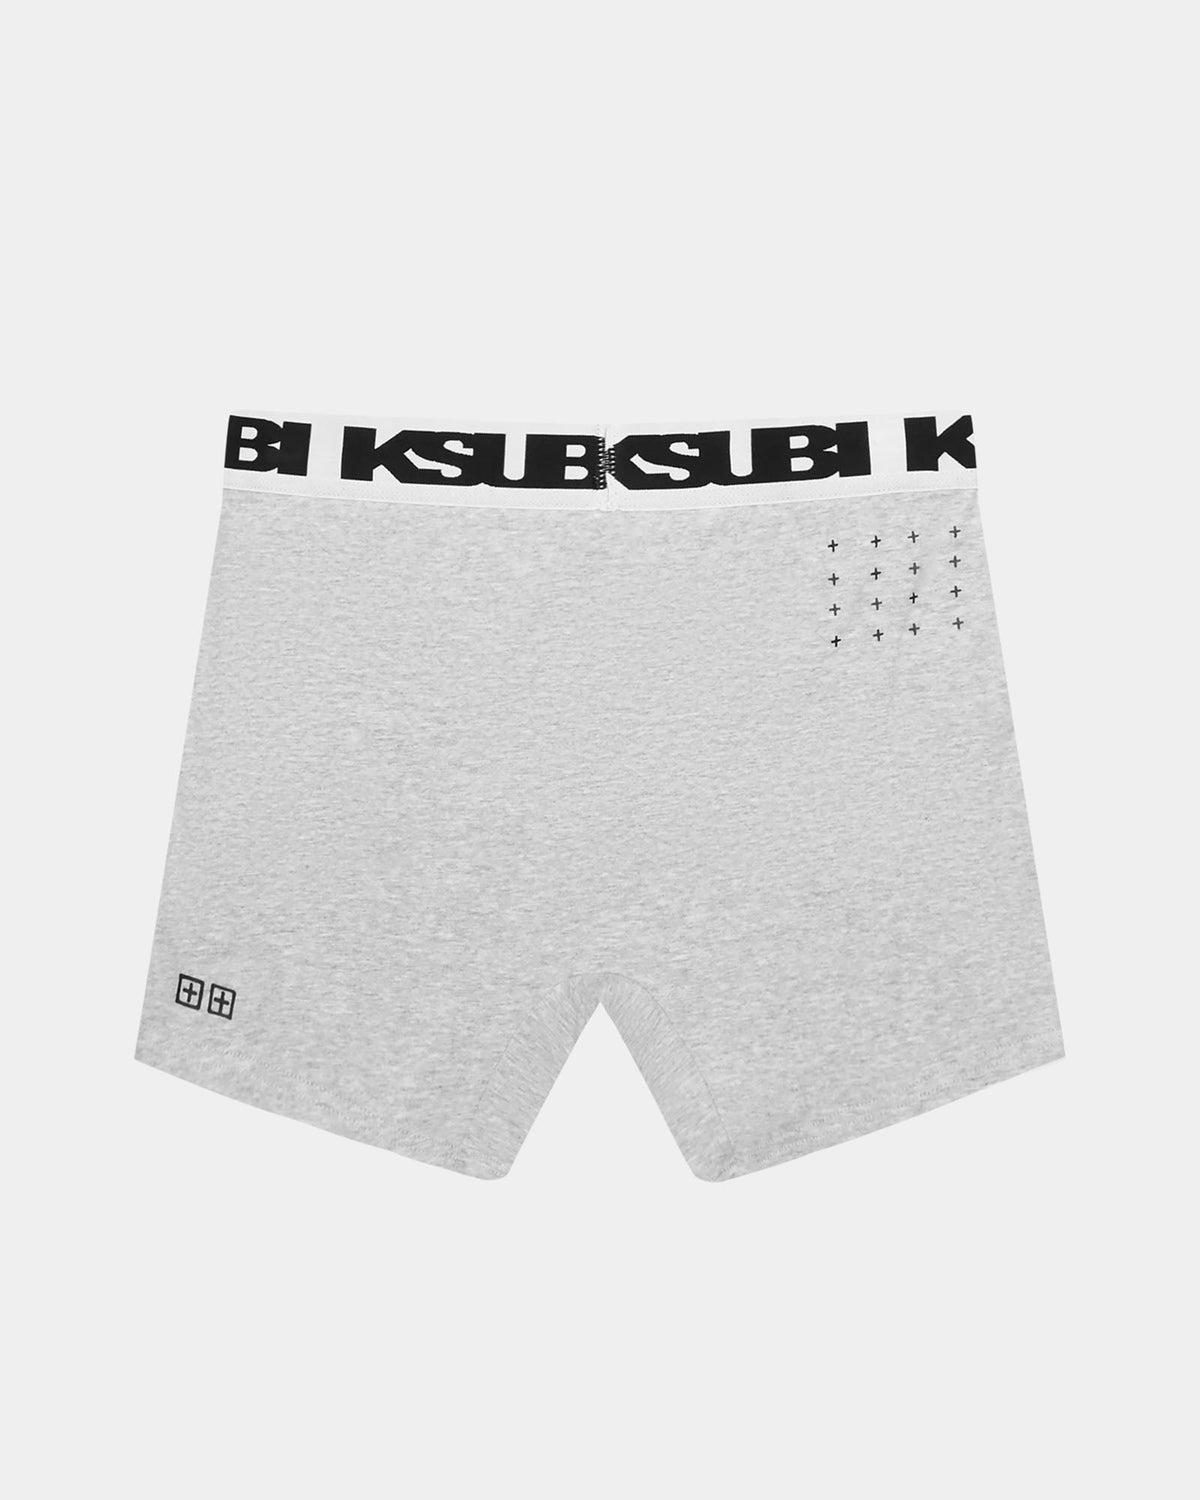 ROYALTY BOXER BRIEF 3 PACK MULTI